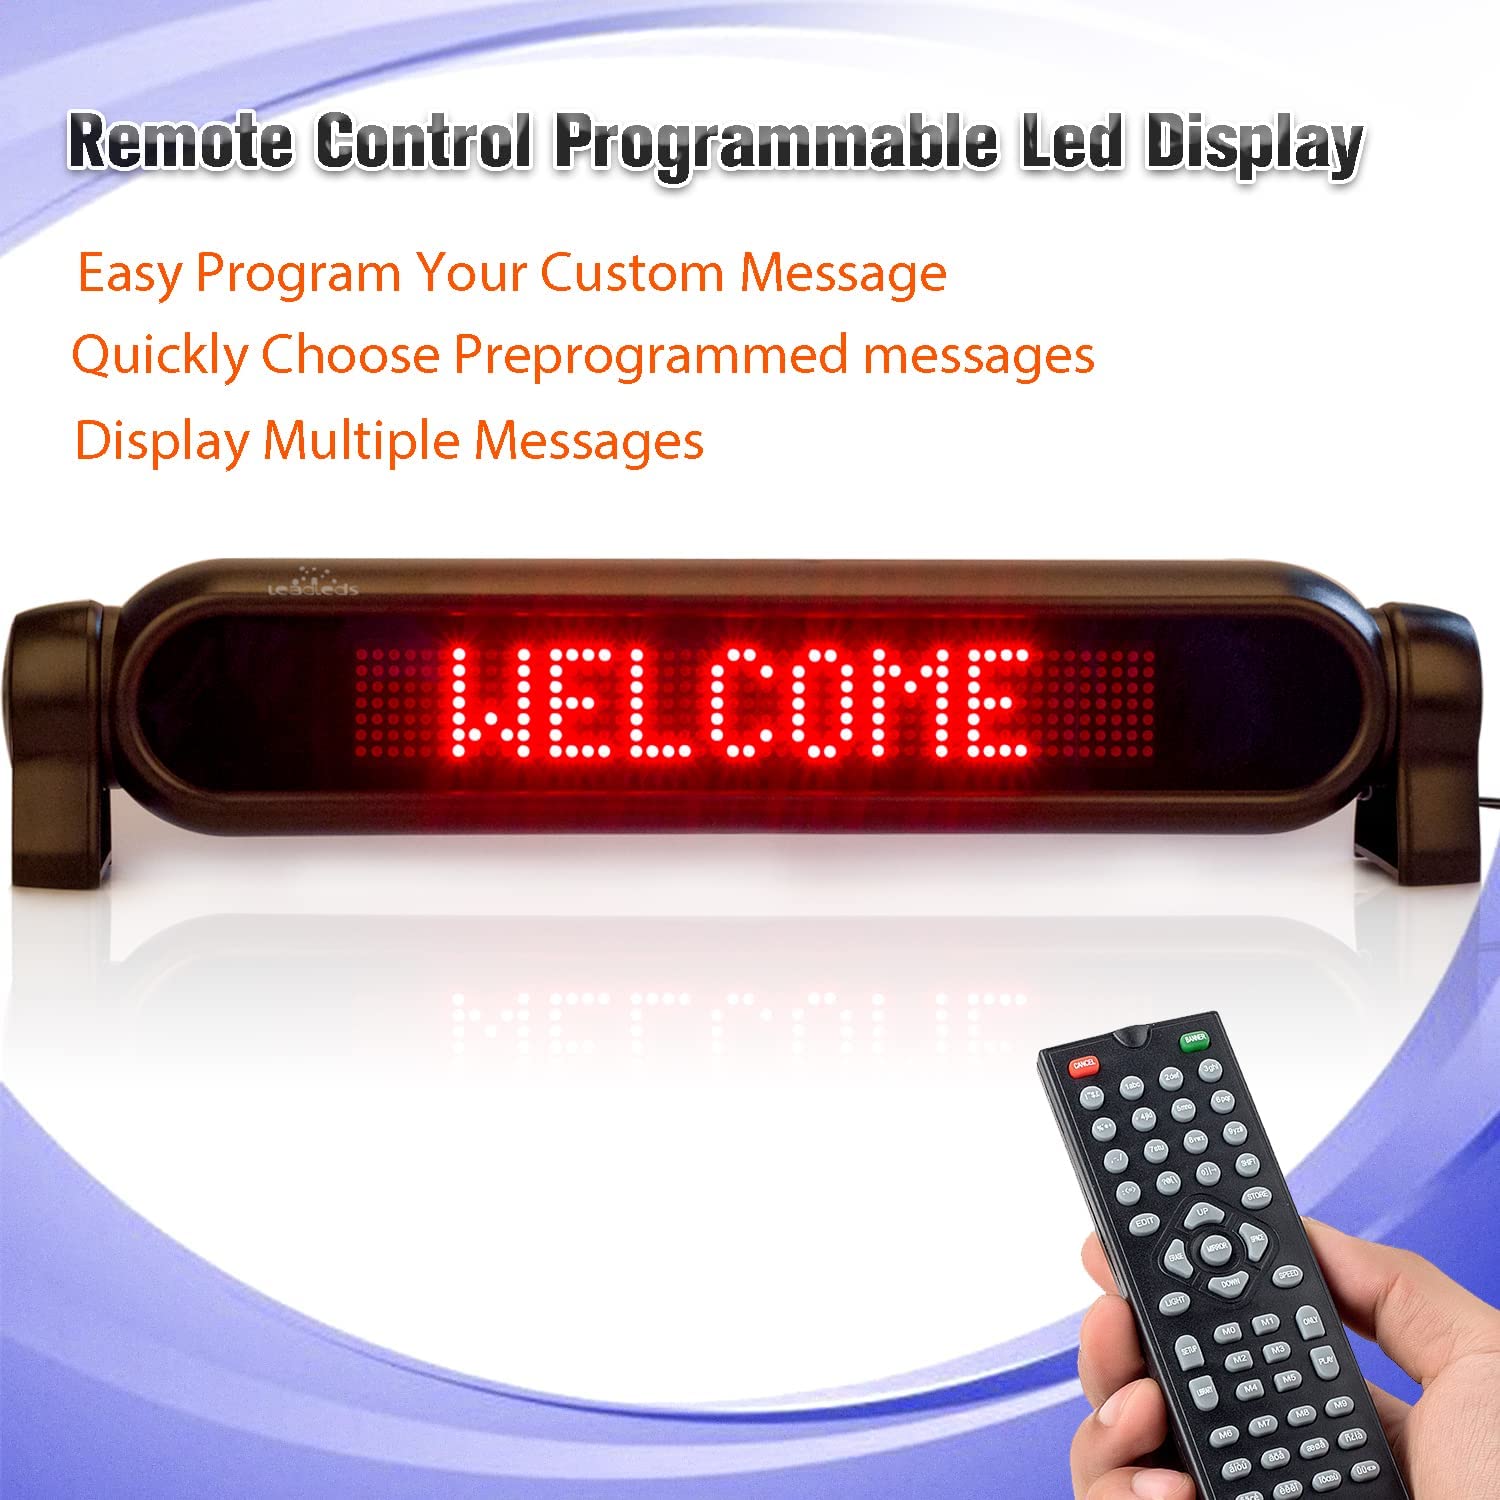 REMOTE CONTROLLED LED SIGN FOR CAR WINDOWS